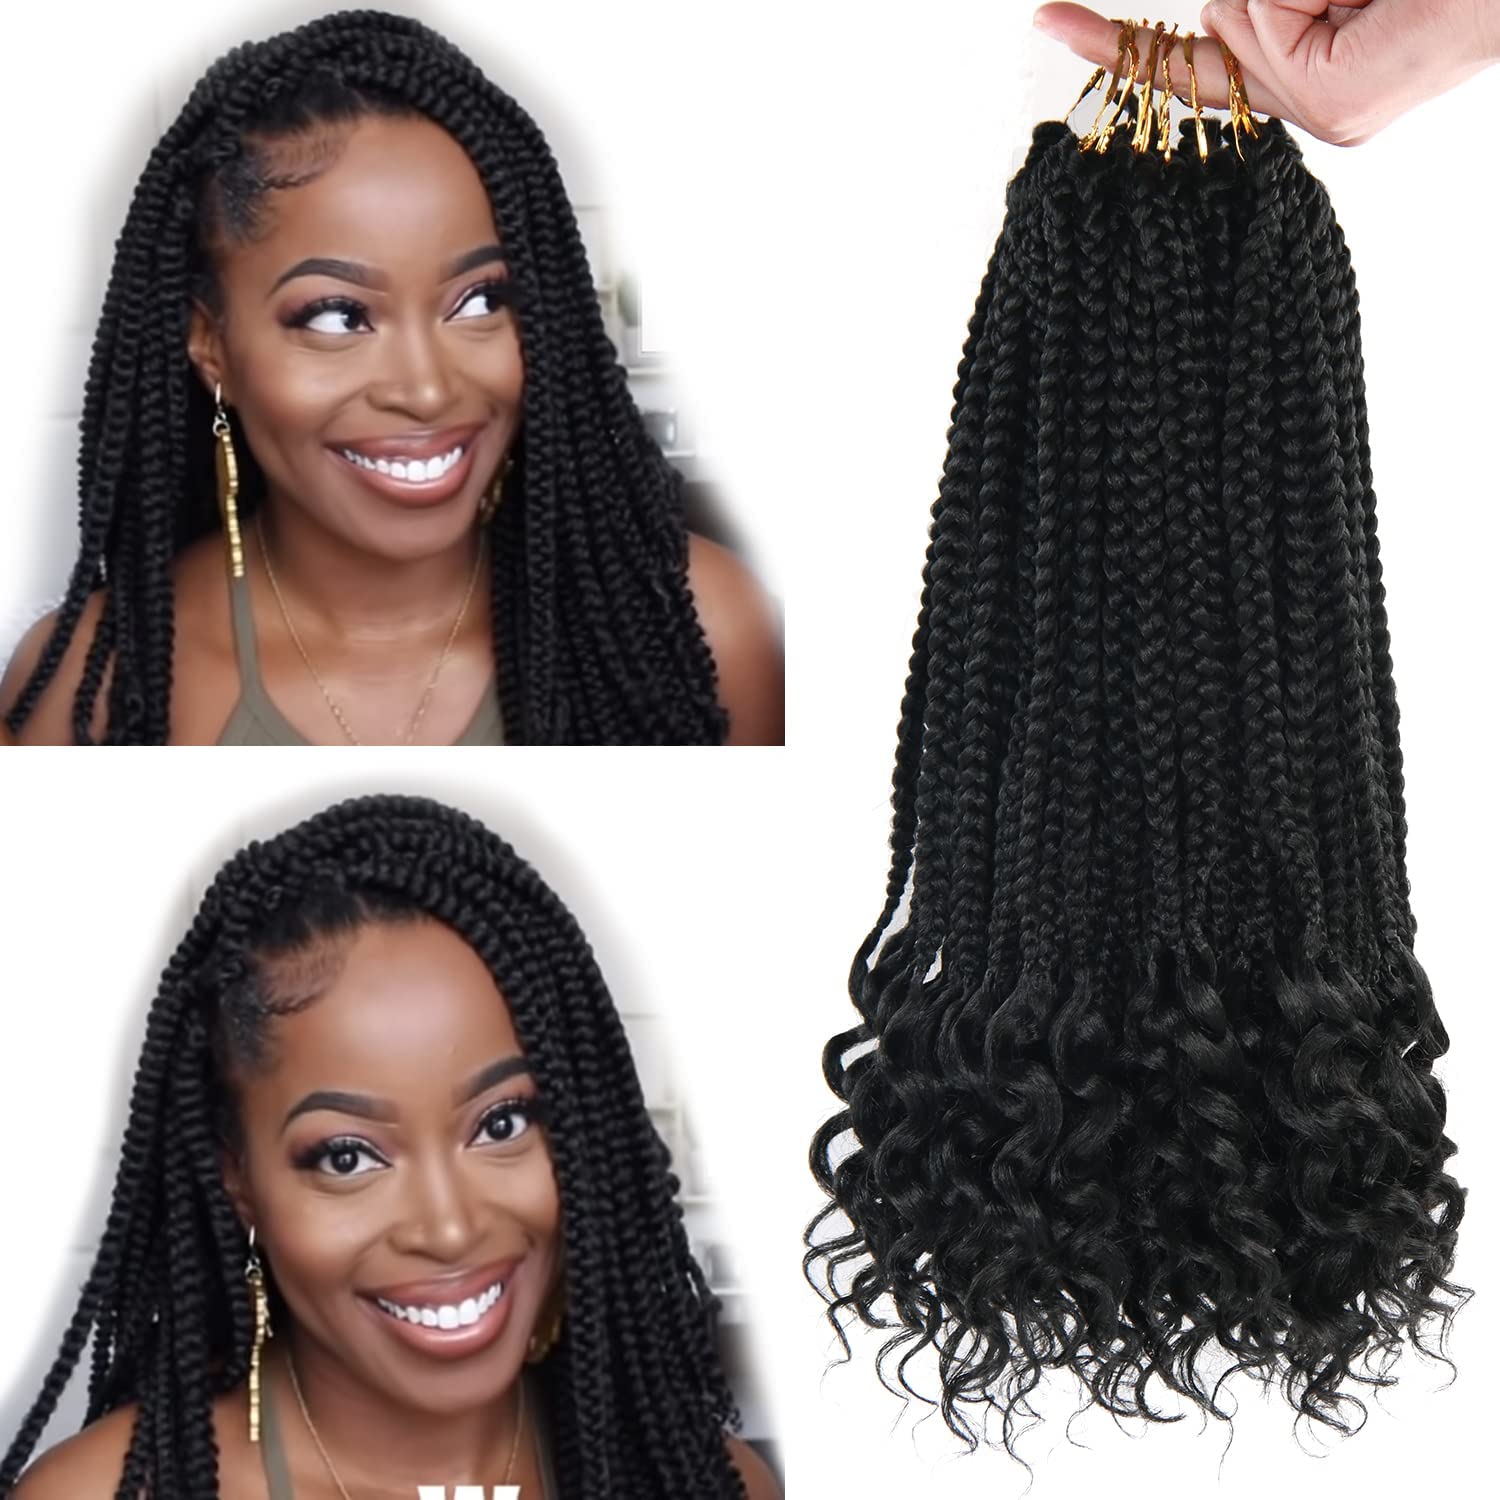 CROCHET BRAIDS WITH CURLY ENDS 